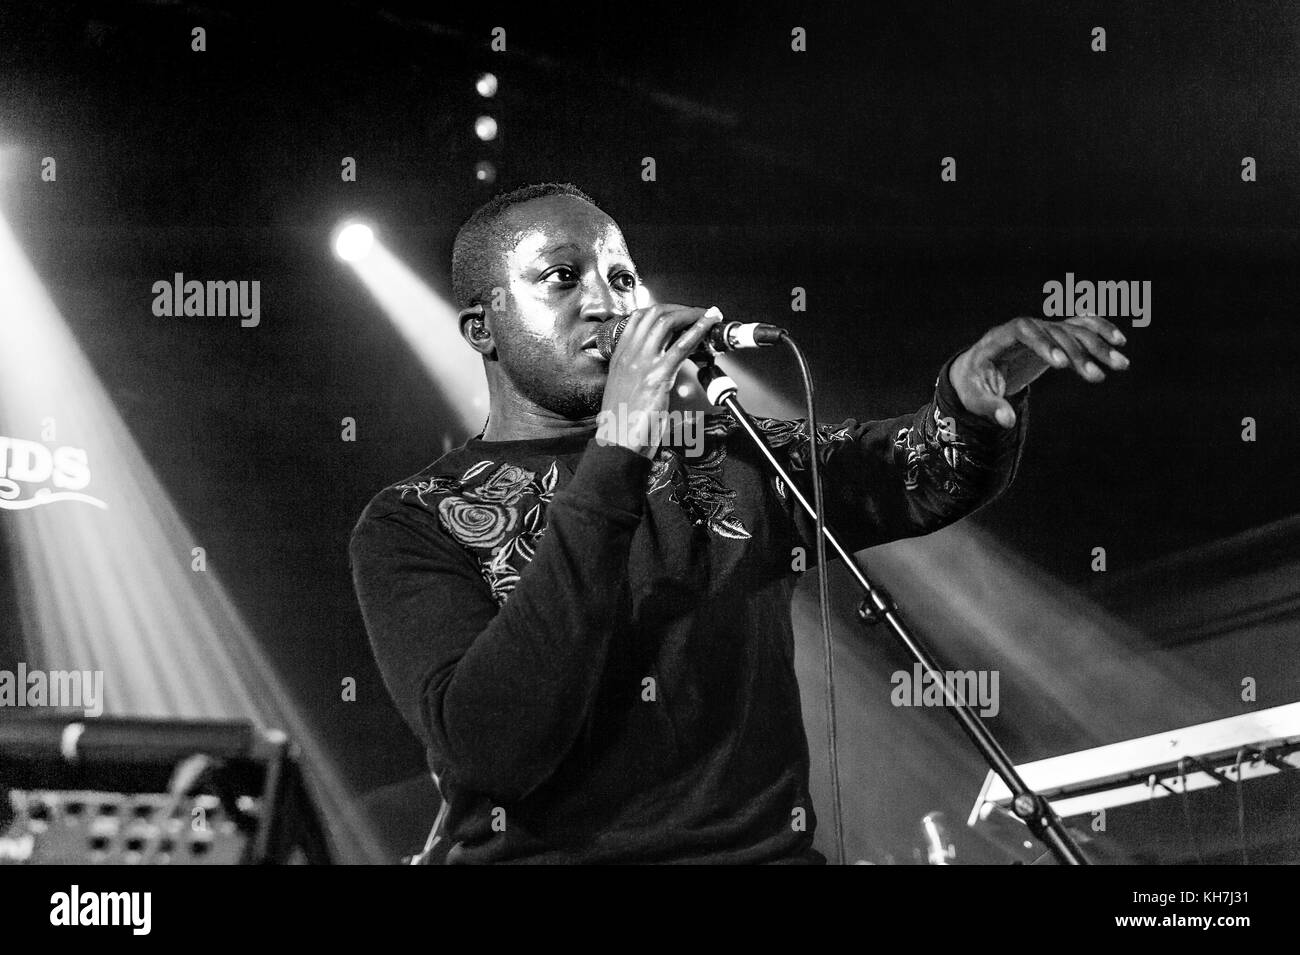 Birmingham, UK. 13th November, 2017. Rationale play a rescheduled date at Birmingham Hare & Hounds. © Ken Harrison/Alamy Live News Stock Photo